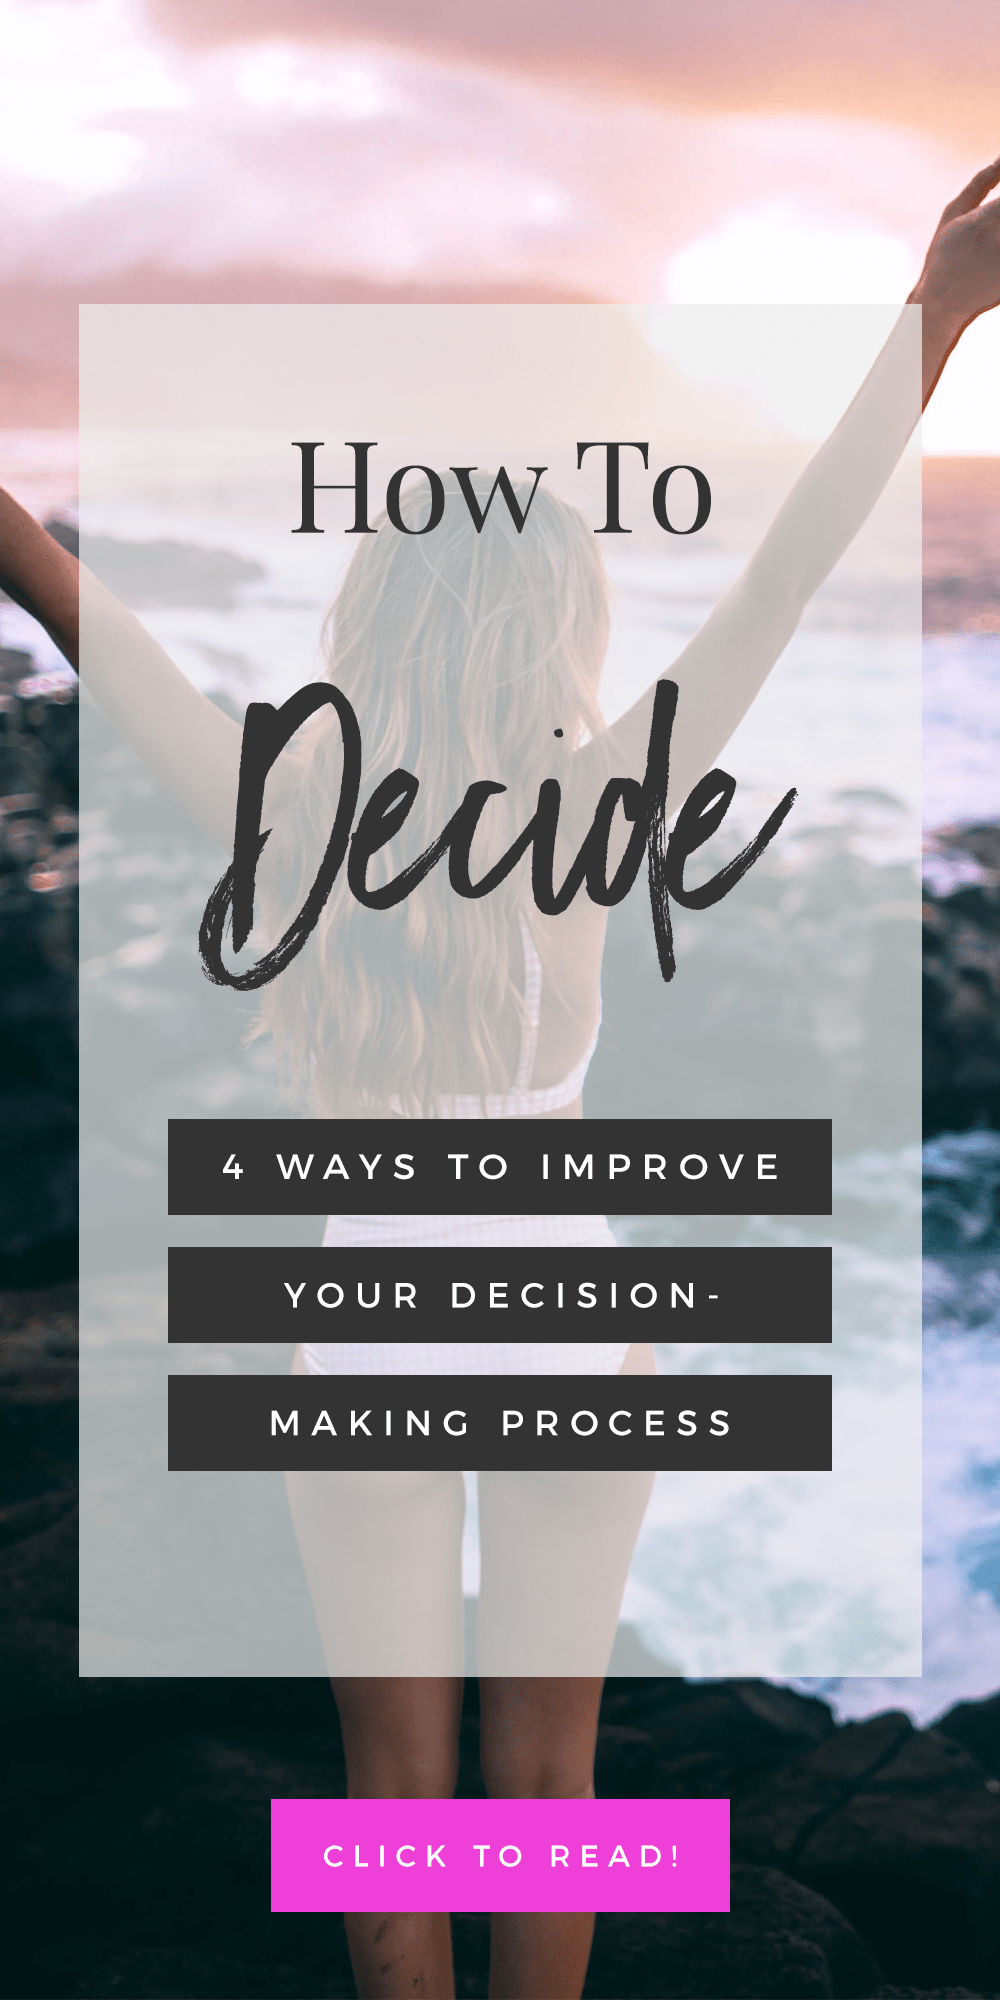 How To Decide: 4 Ways To Improve Your Decision-Making Process